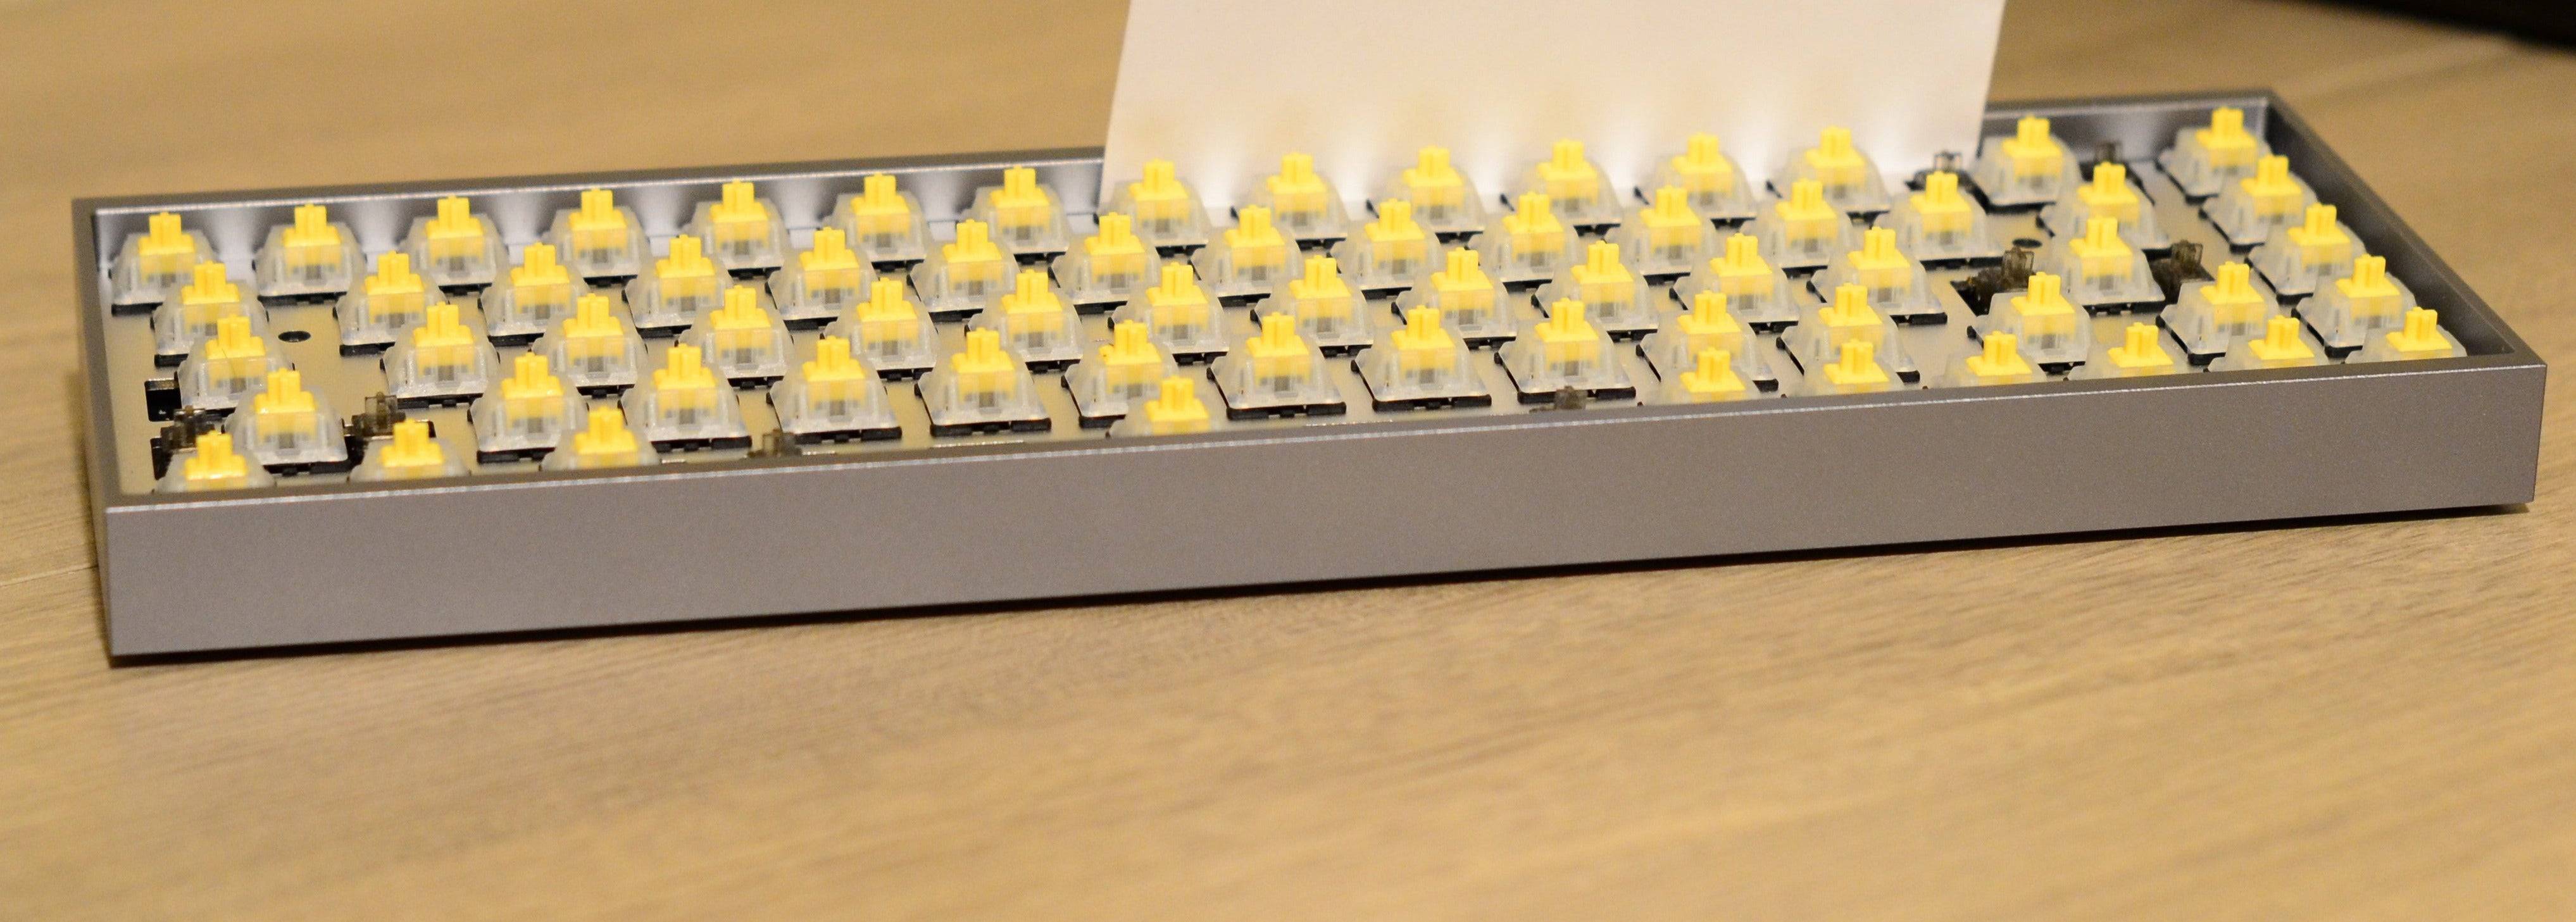 [KFA MARKETPLACE] Built Tofu 65 w/ Lubed and Filmed Gateron Yellows (no keycaps) - KeebsForAll